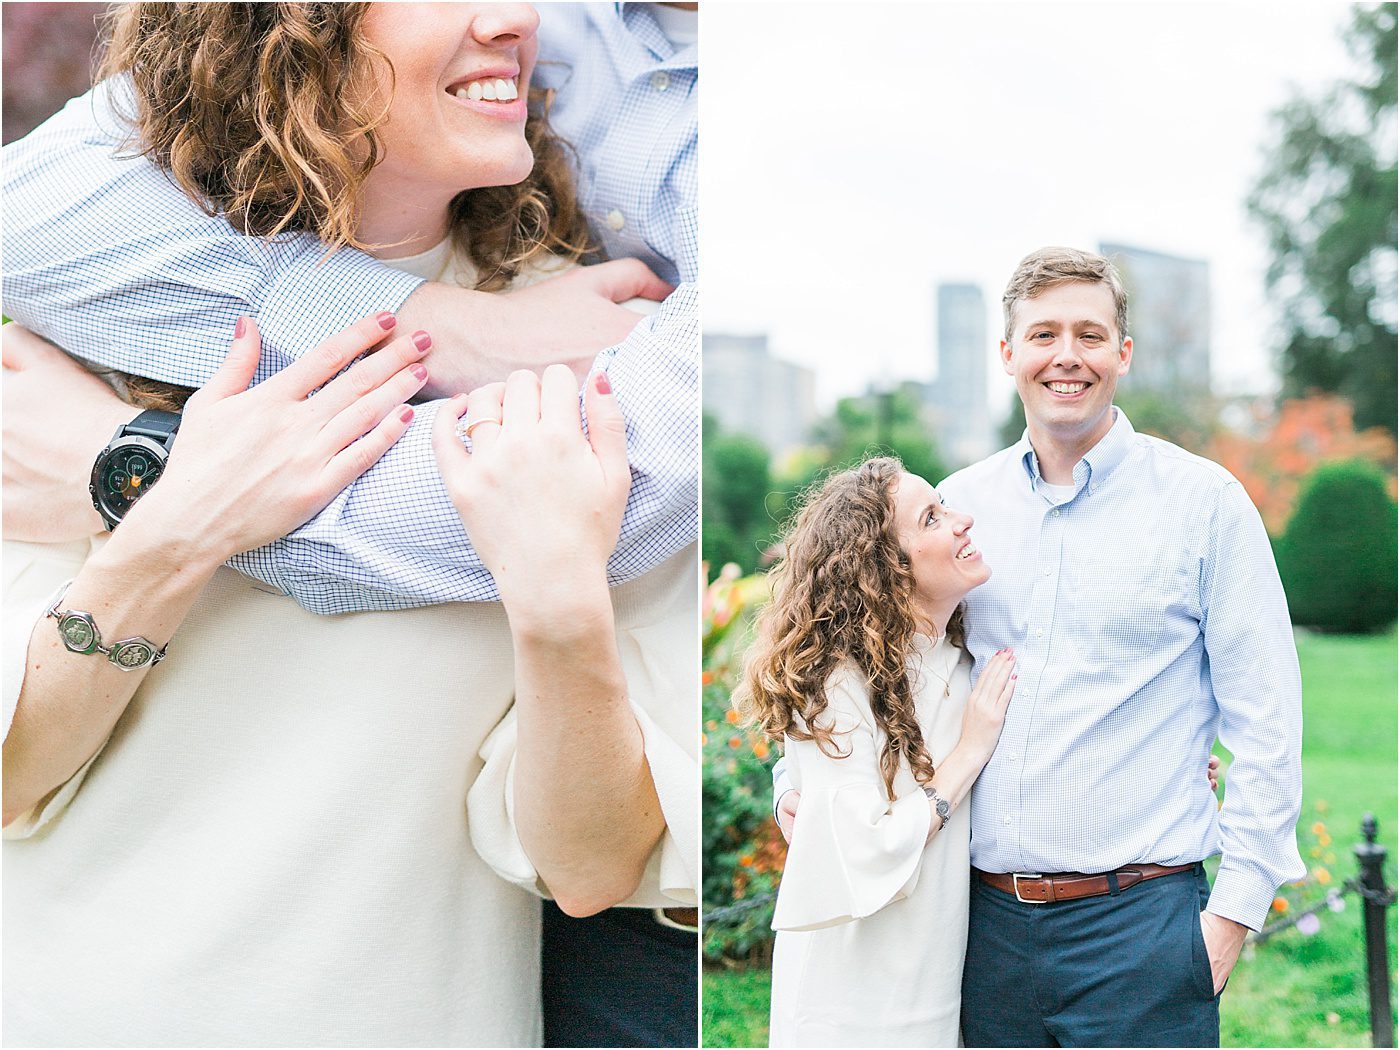 Engagement photos of Boston public gardens with skyline in the background | Catherine Ann Photography